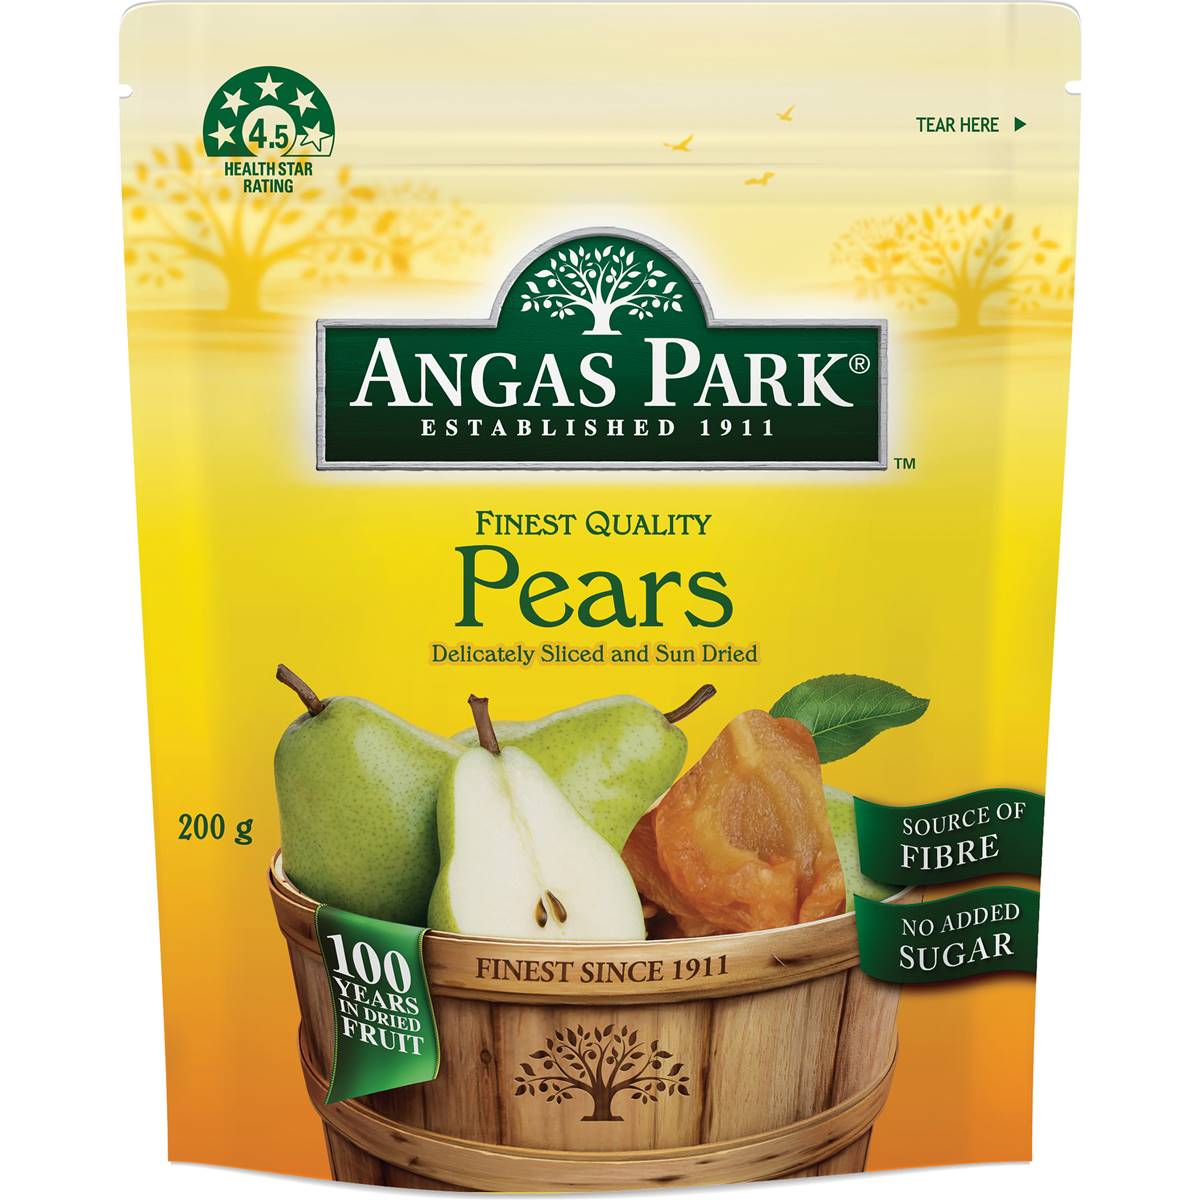 Calories in Angas Park Dried Pears